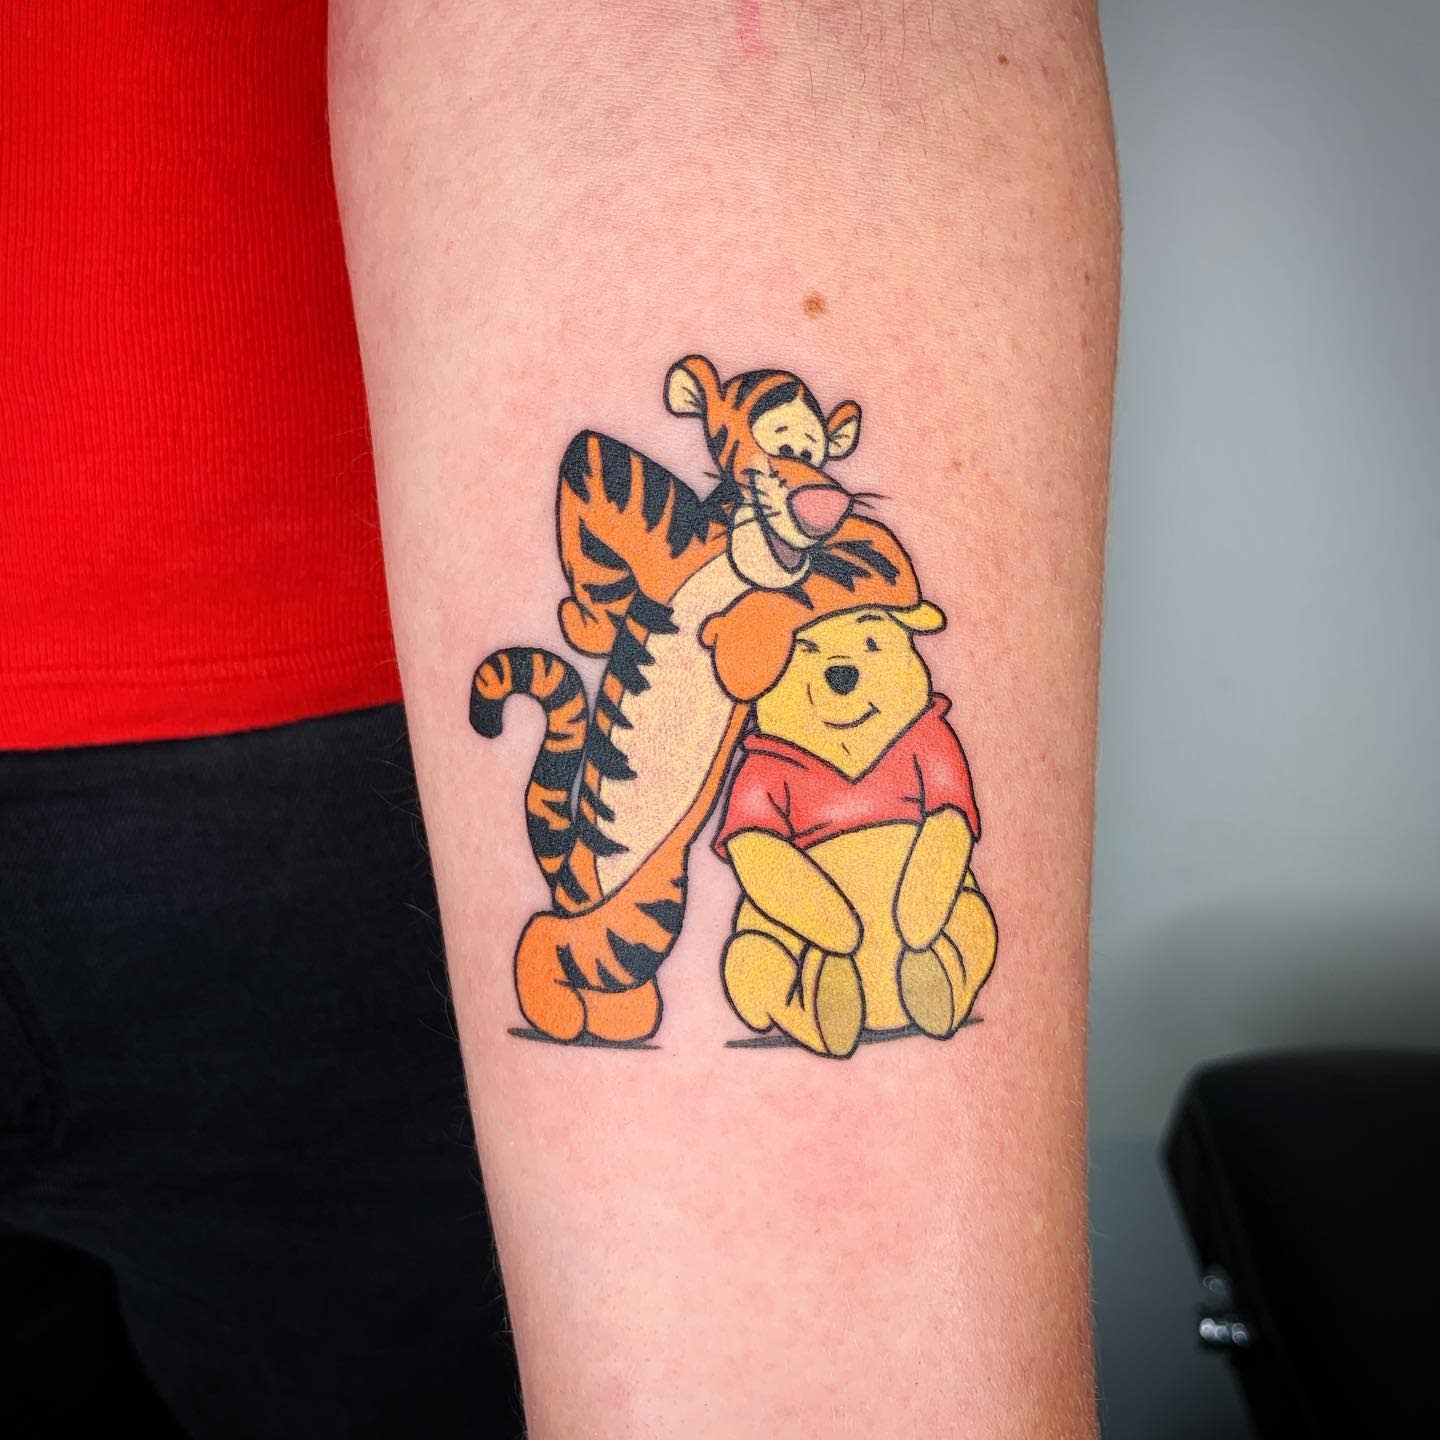 EngineerInk Tattoo  Body Piercing  Mother daughter tattoos  of Pooh  Bear and Piglet  by boehmer85         disneydisneytattoomotherdaughtermotherdaughtertattoopoohbearpoohandpigletpoohbeartattoo  disneytatts disneytat 